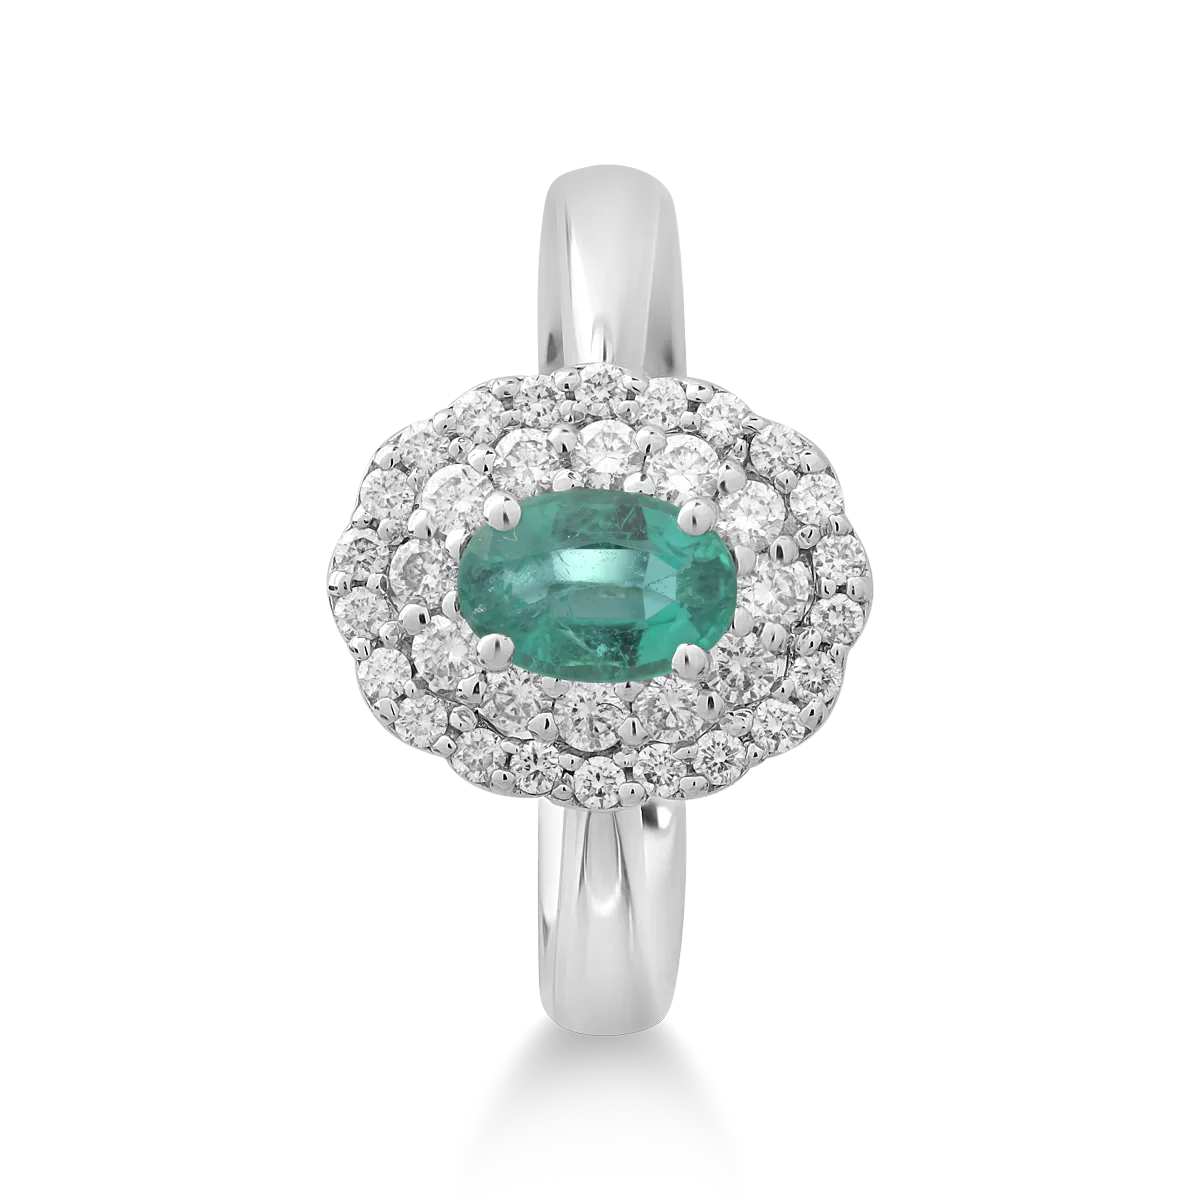 18Kt white gold ring with 0.3ct emerald and 0.36ct diamonds